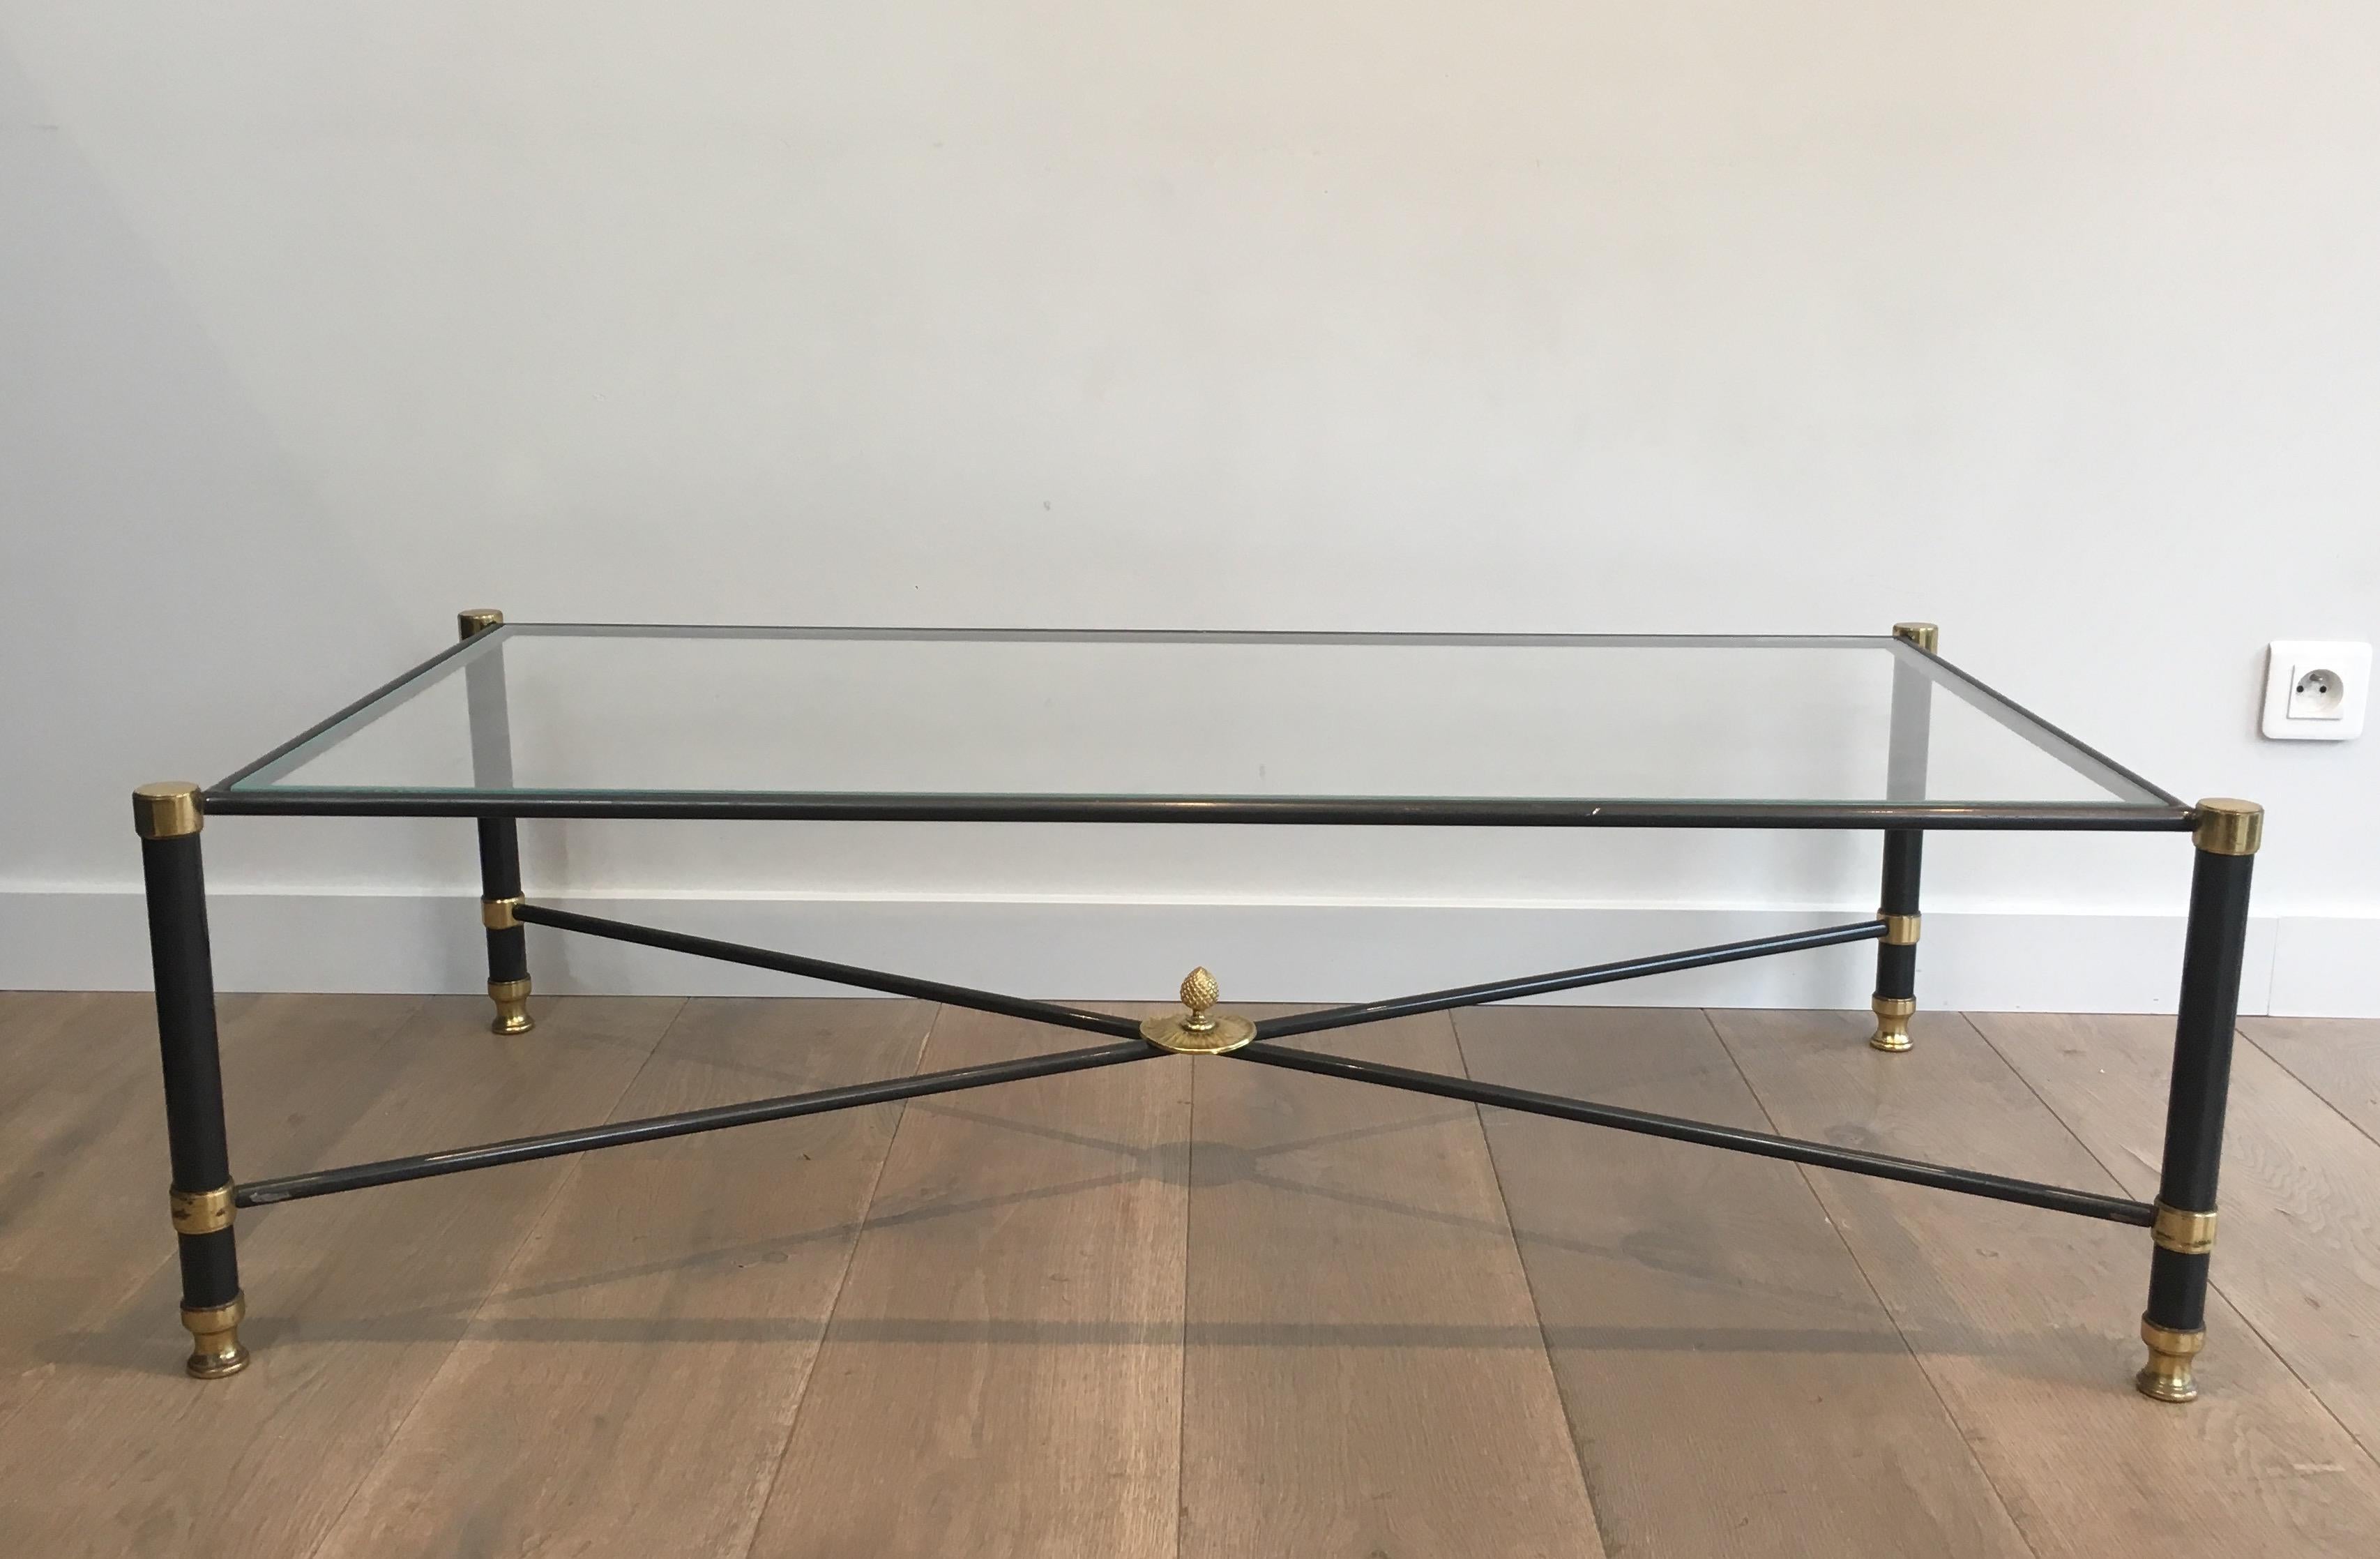 This very nice and elegant neoclassical style coffee table is made of gun metal and brass with a clear glass top. This is a cocktail table by famous French designer Guy Lefevre for Maison Jansen, circa 1970.